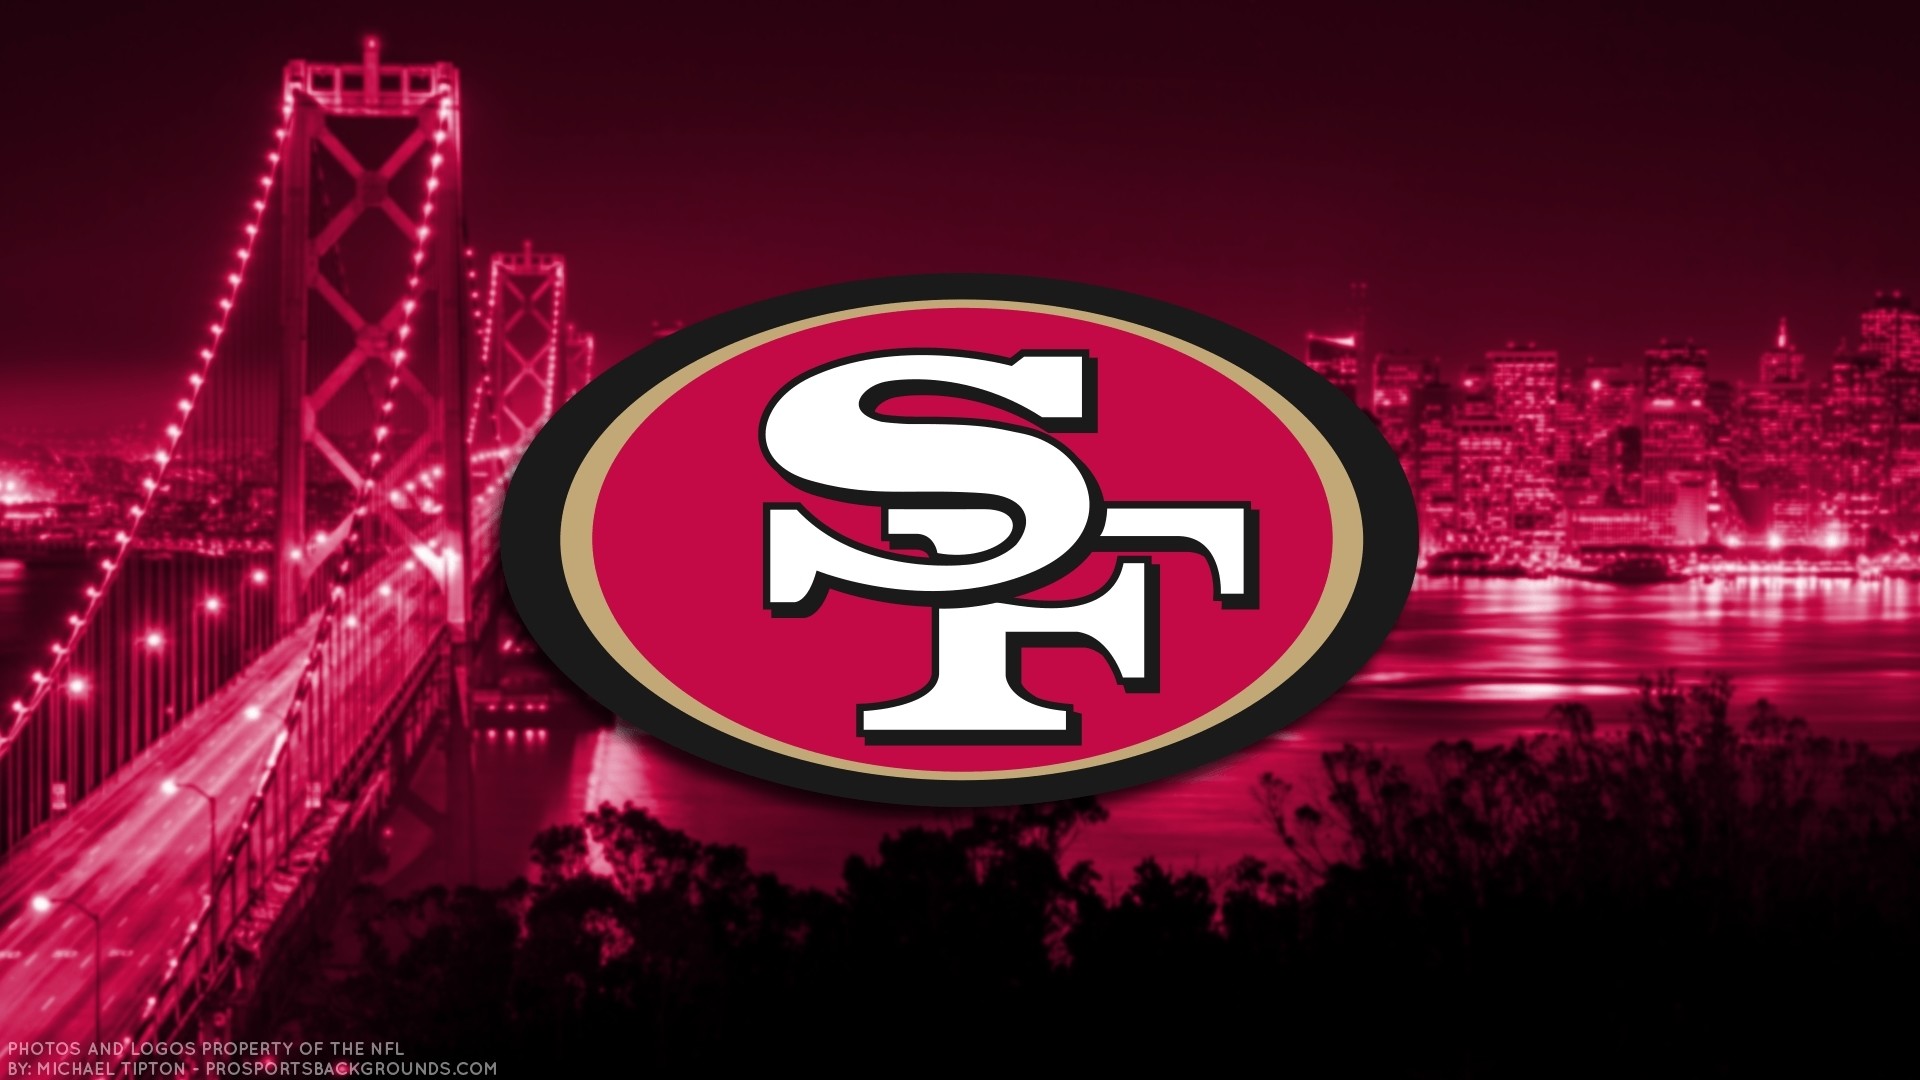 1920x1080 Title : san francisco 49ers wallpaper backgrounds computer screen for.  Dimension : 1920 x 1080. File Type : JPG/JPEG